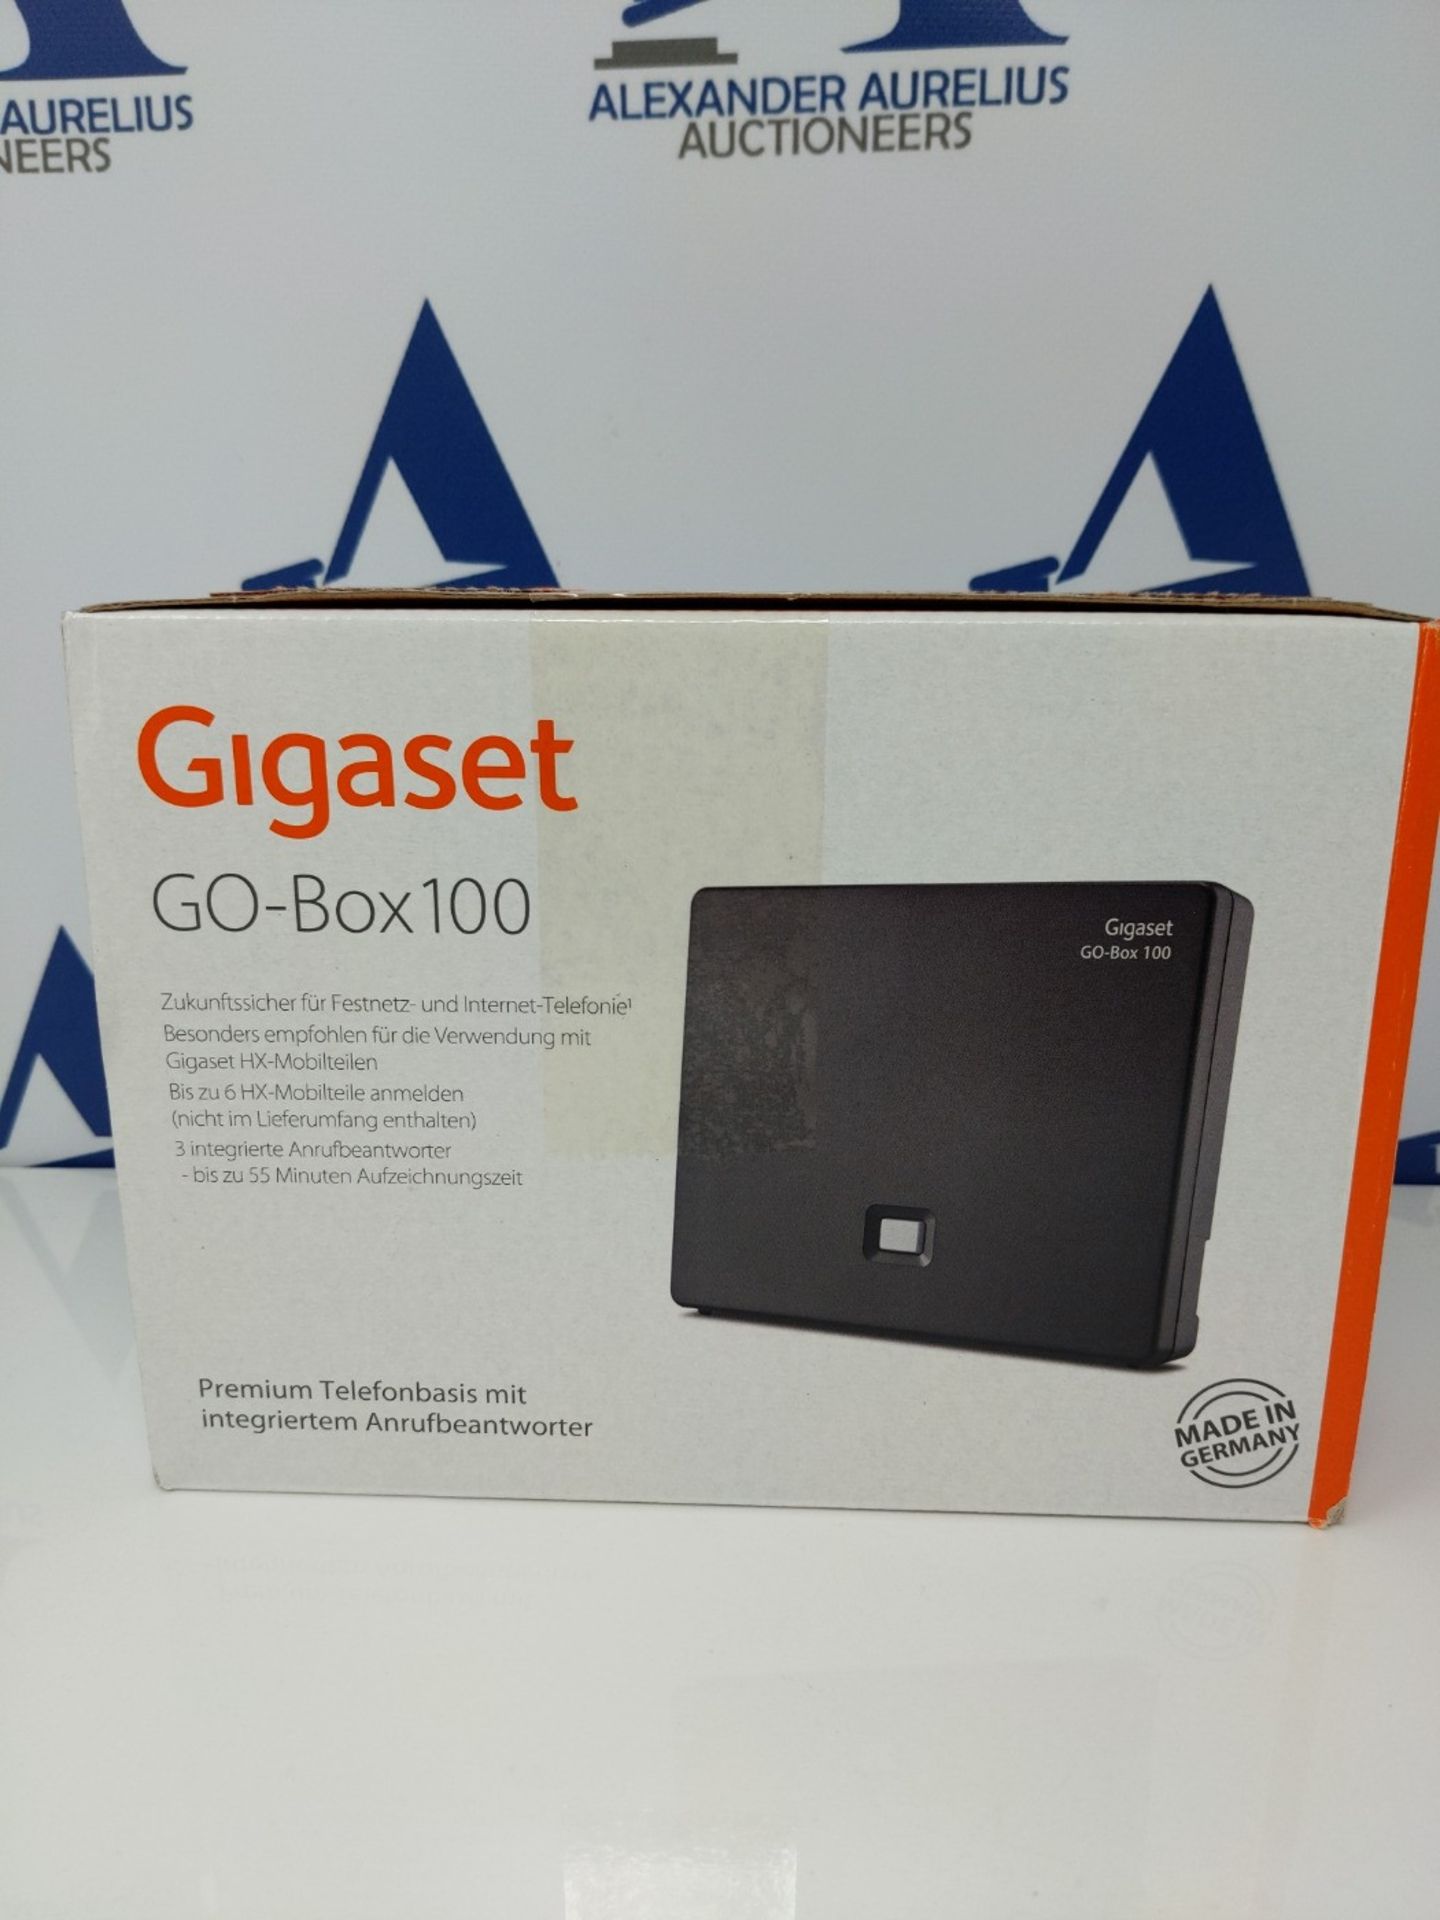 Gigaset DECT base station GO Box 100 - analogue connection via TAE connection or via L - Image 2 of 3